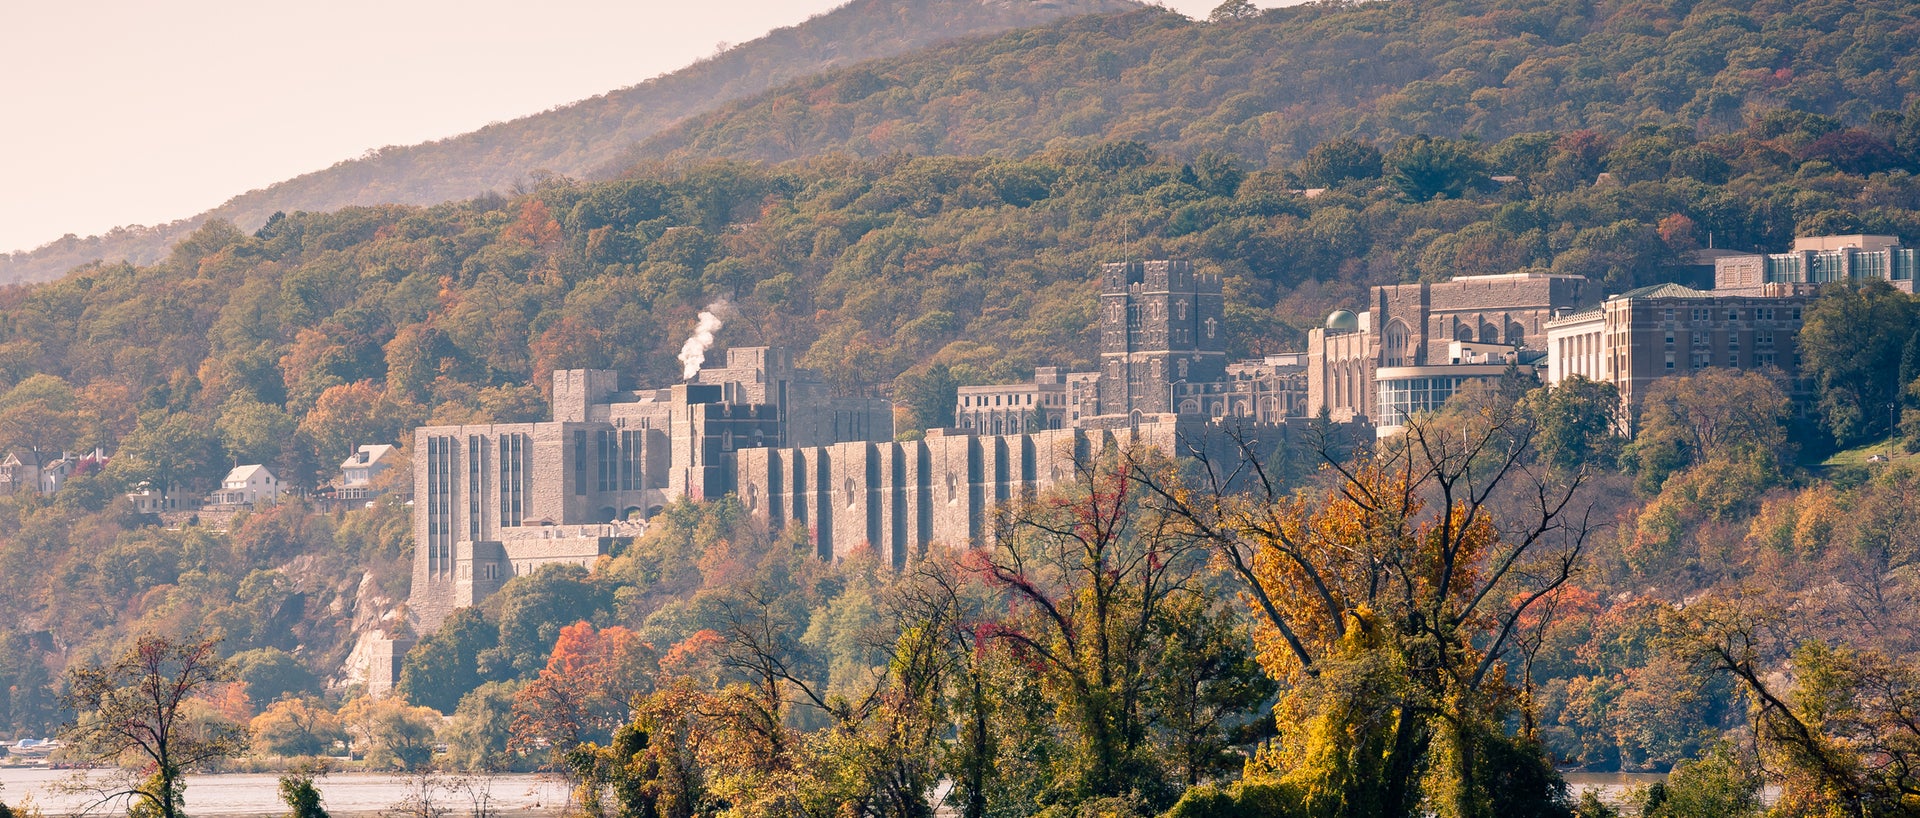 The grounds of United States Military Academy West Point.